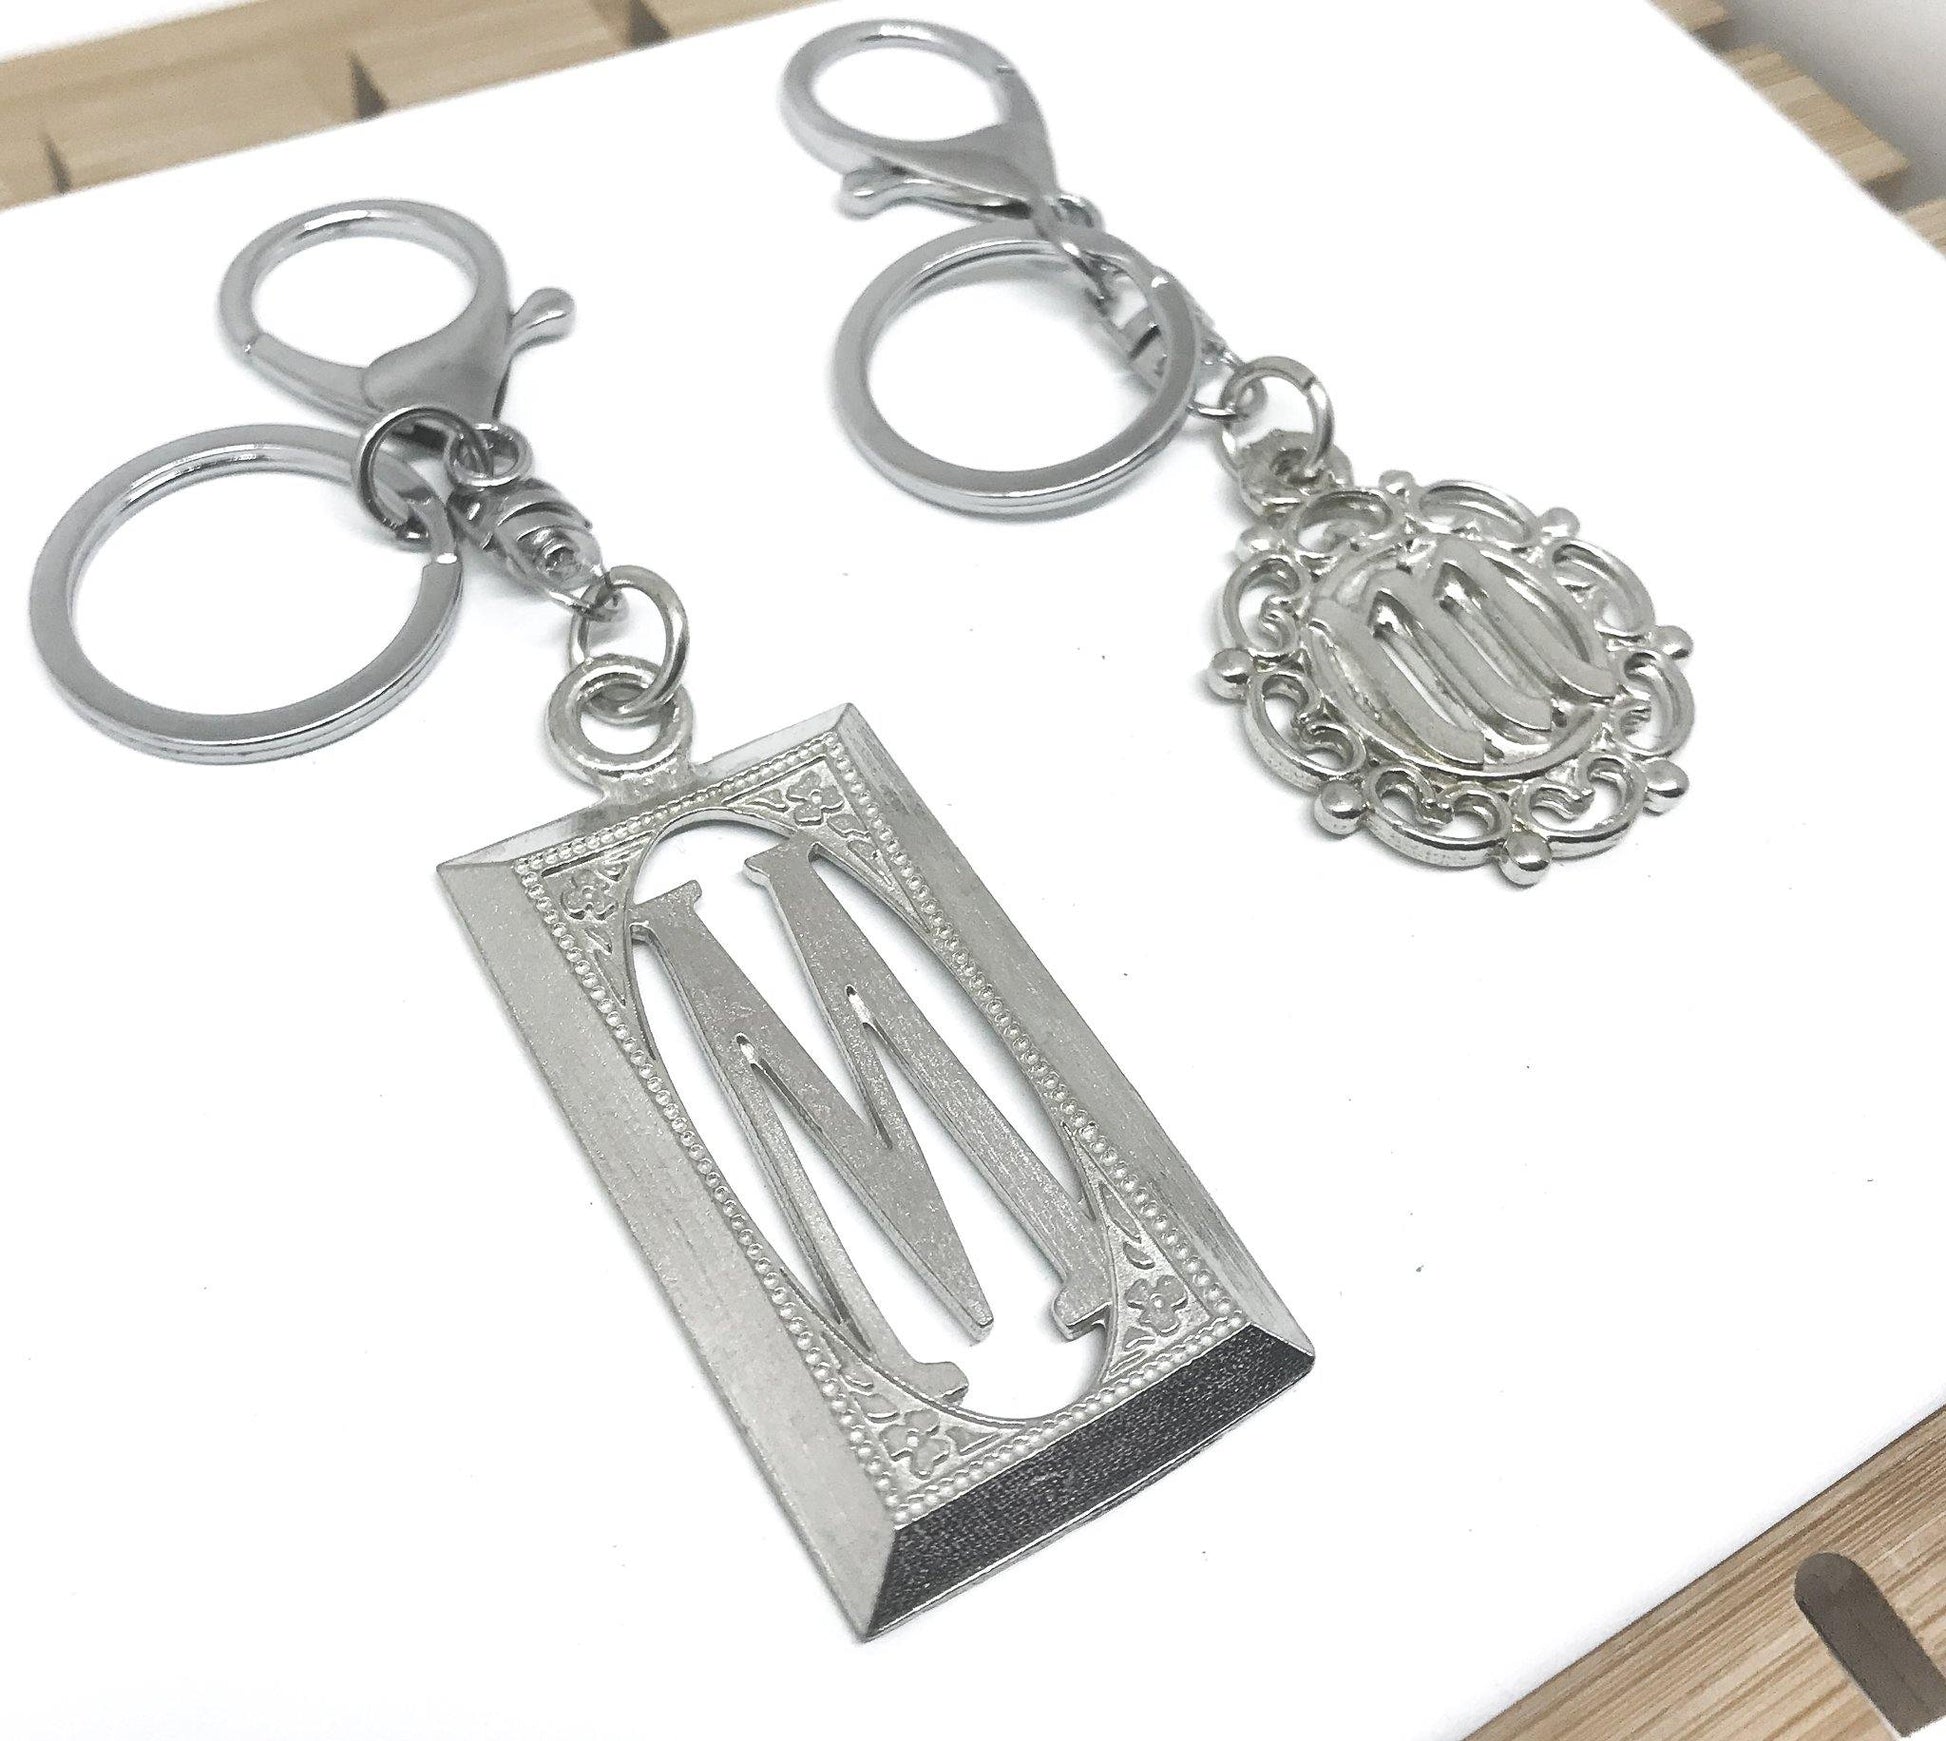 USA Handcrafted Rectangle Monogram Initial Keychain Bag Purse Charm Pewter Wedding Party Gift - House of Morgan Pewter